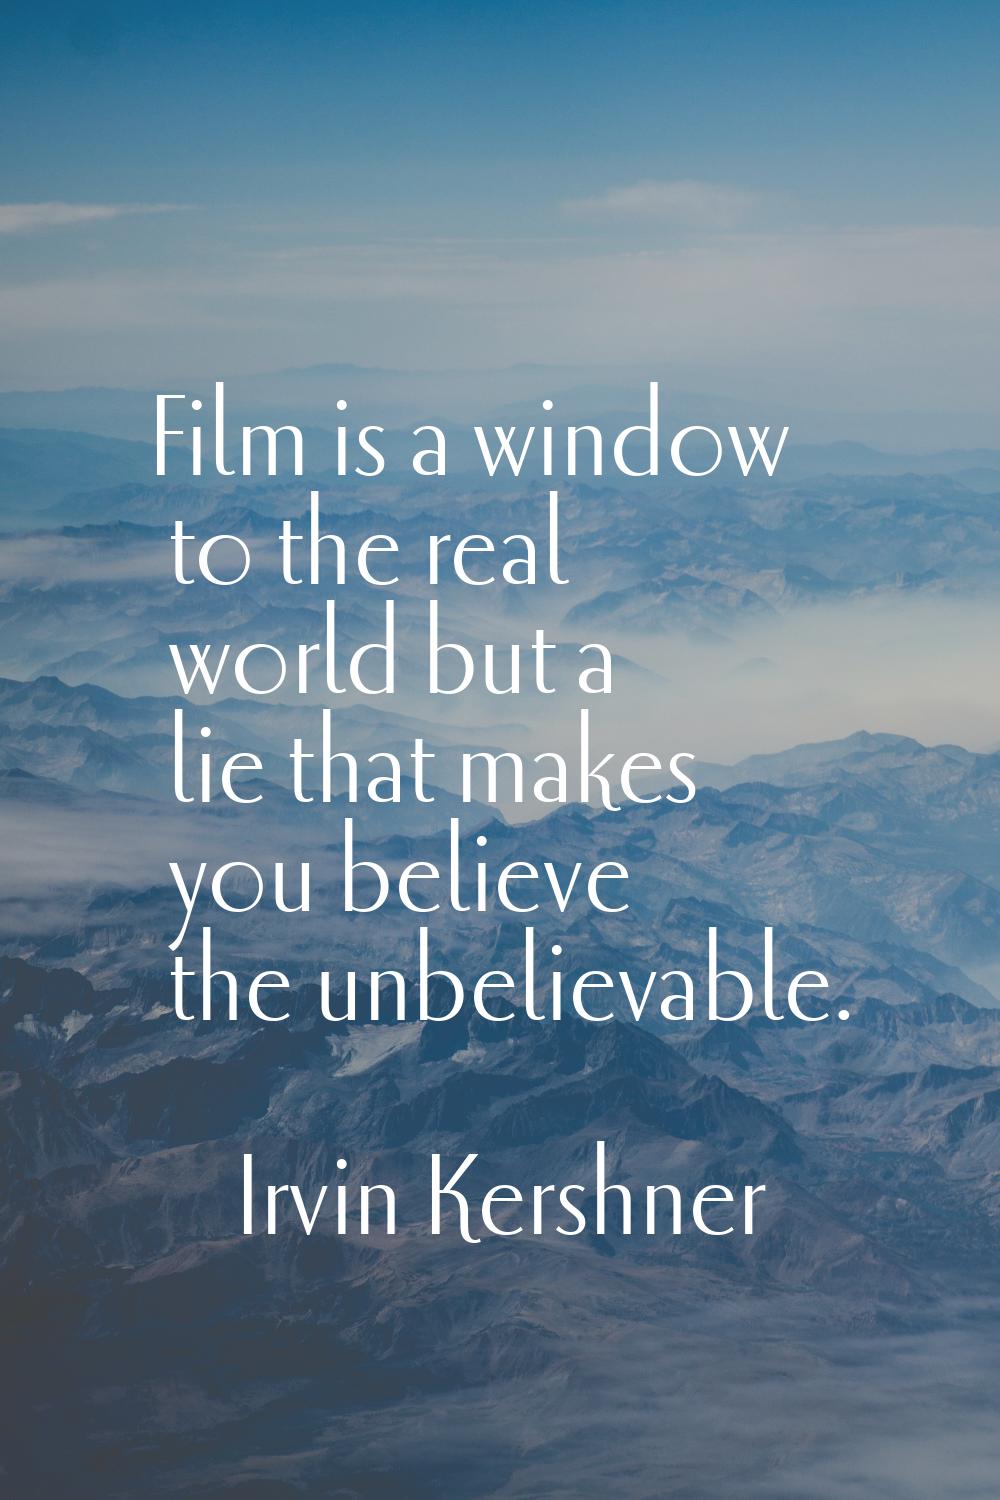 Film is a window to the real world but a lie that makes you believe the unbelievable.